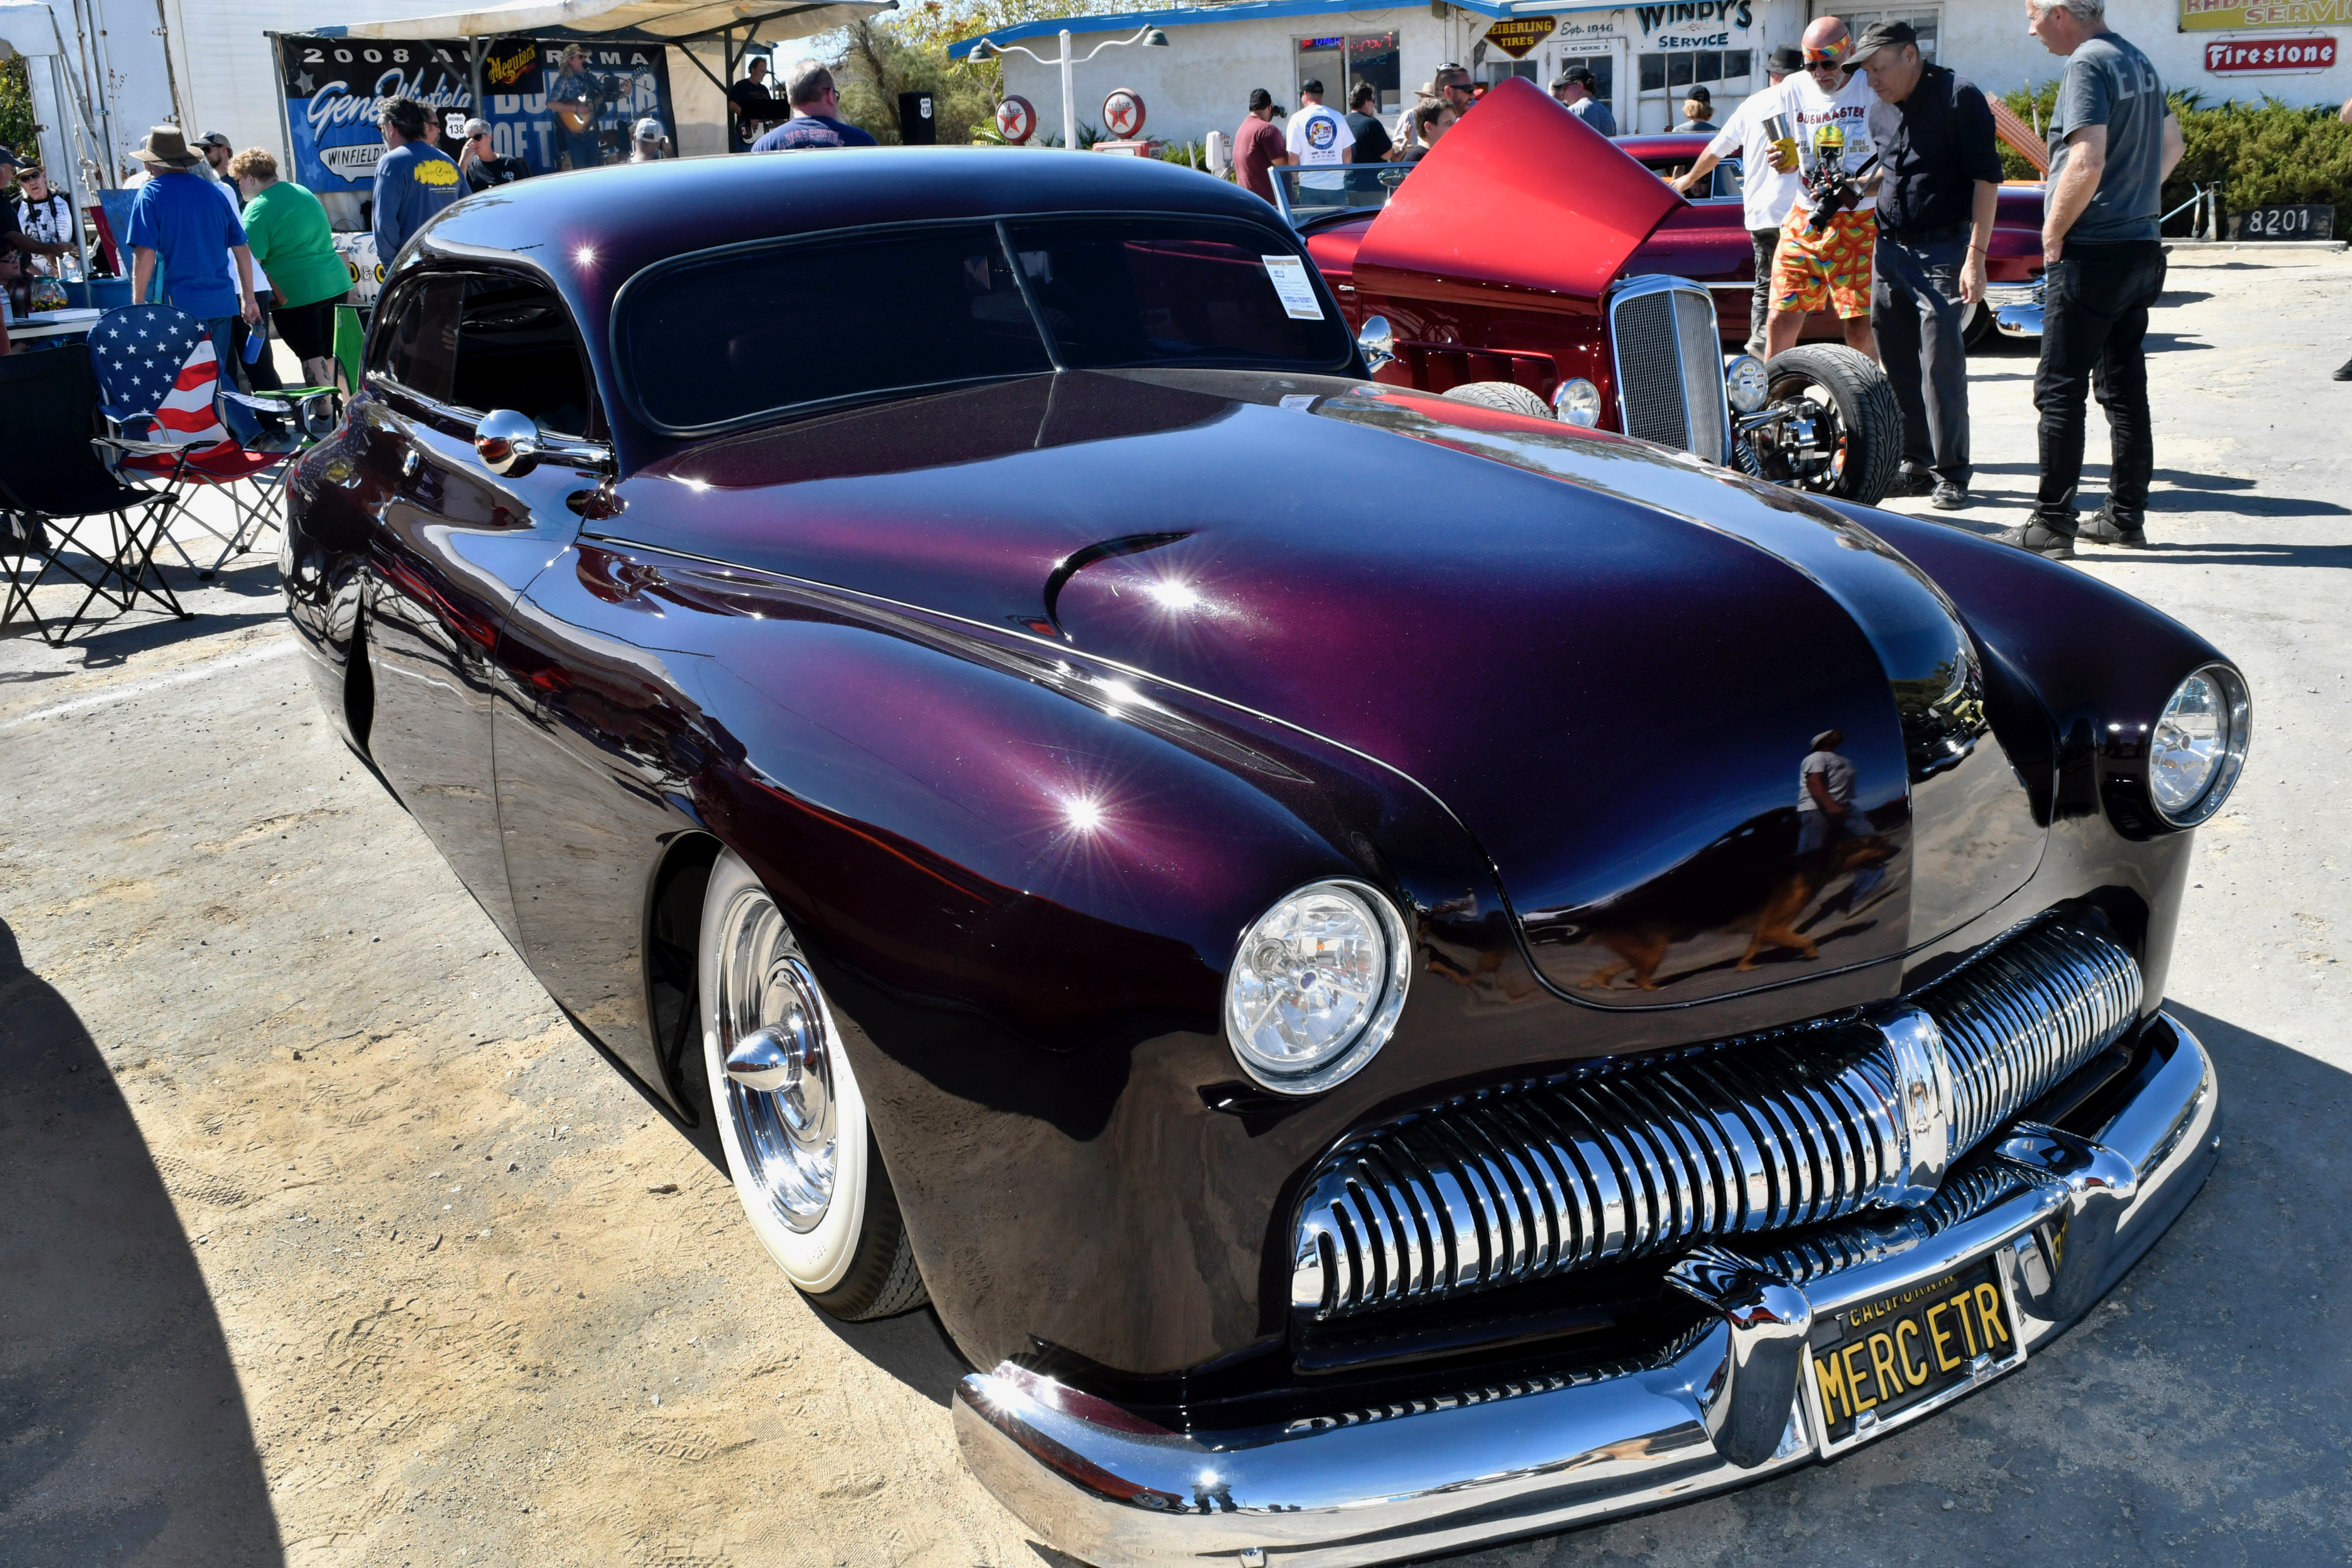 The custom car show must go on, even without host Gene Winfield